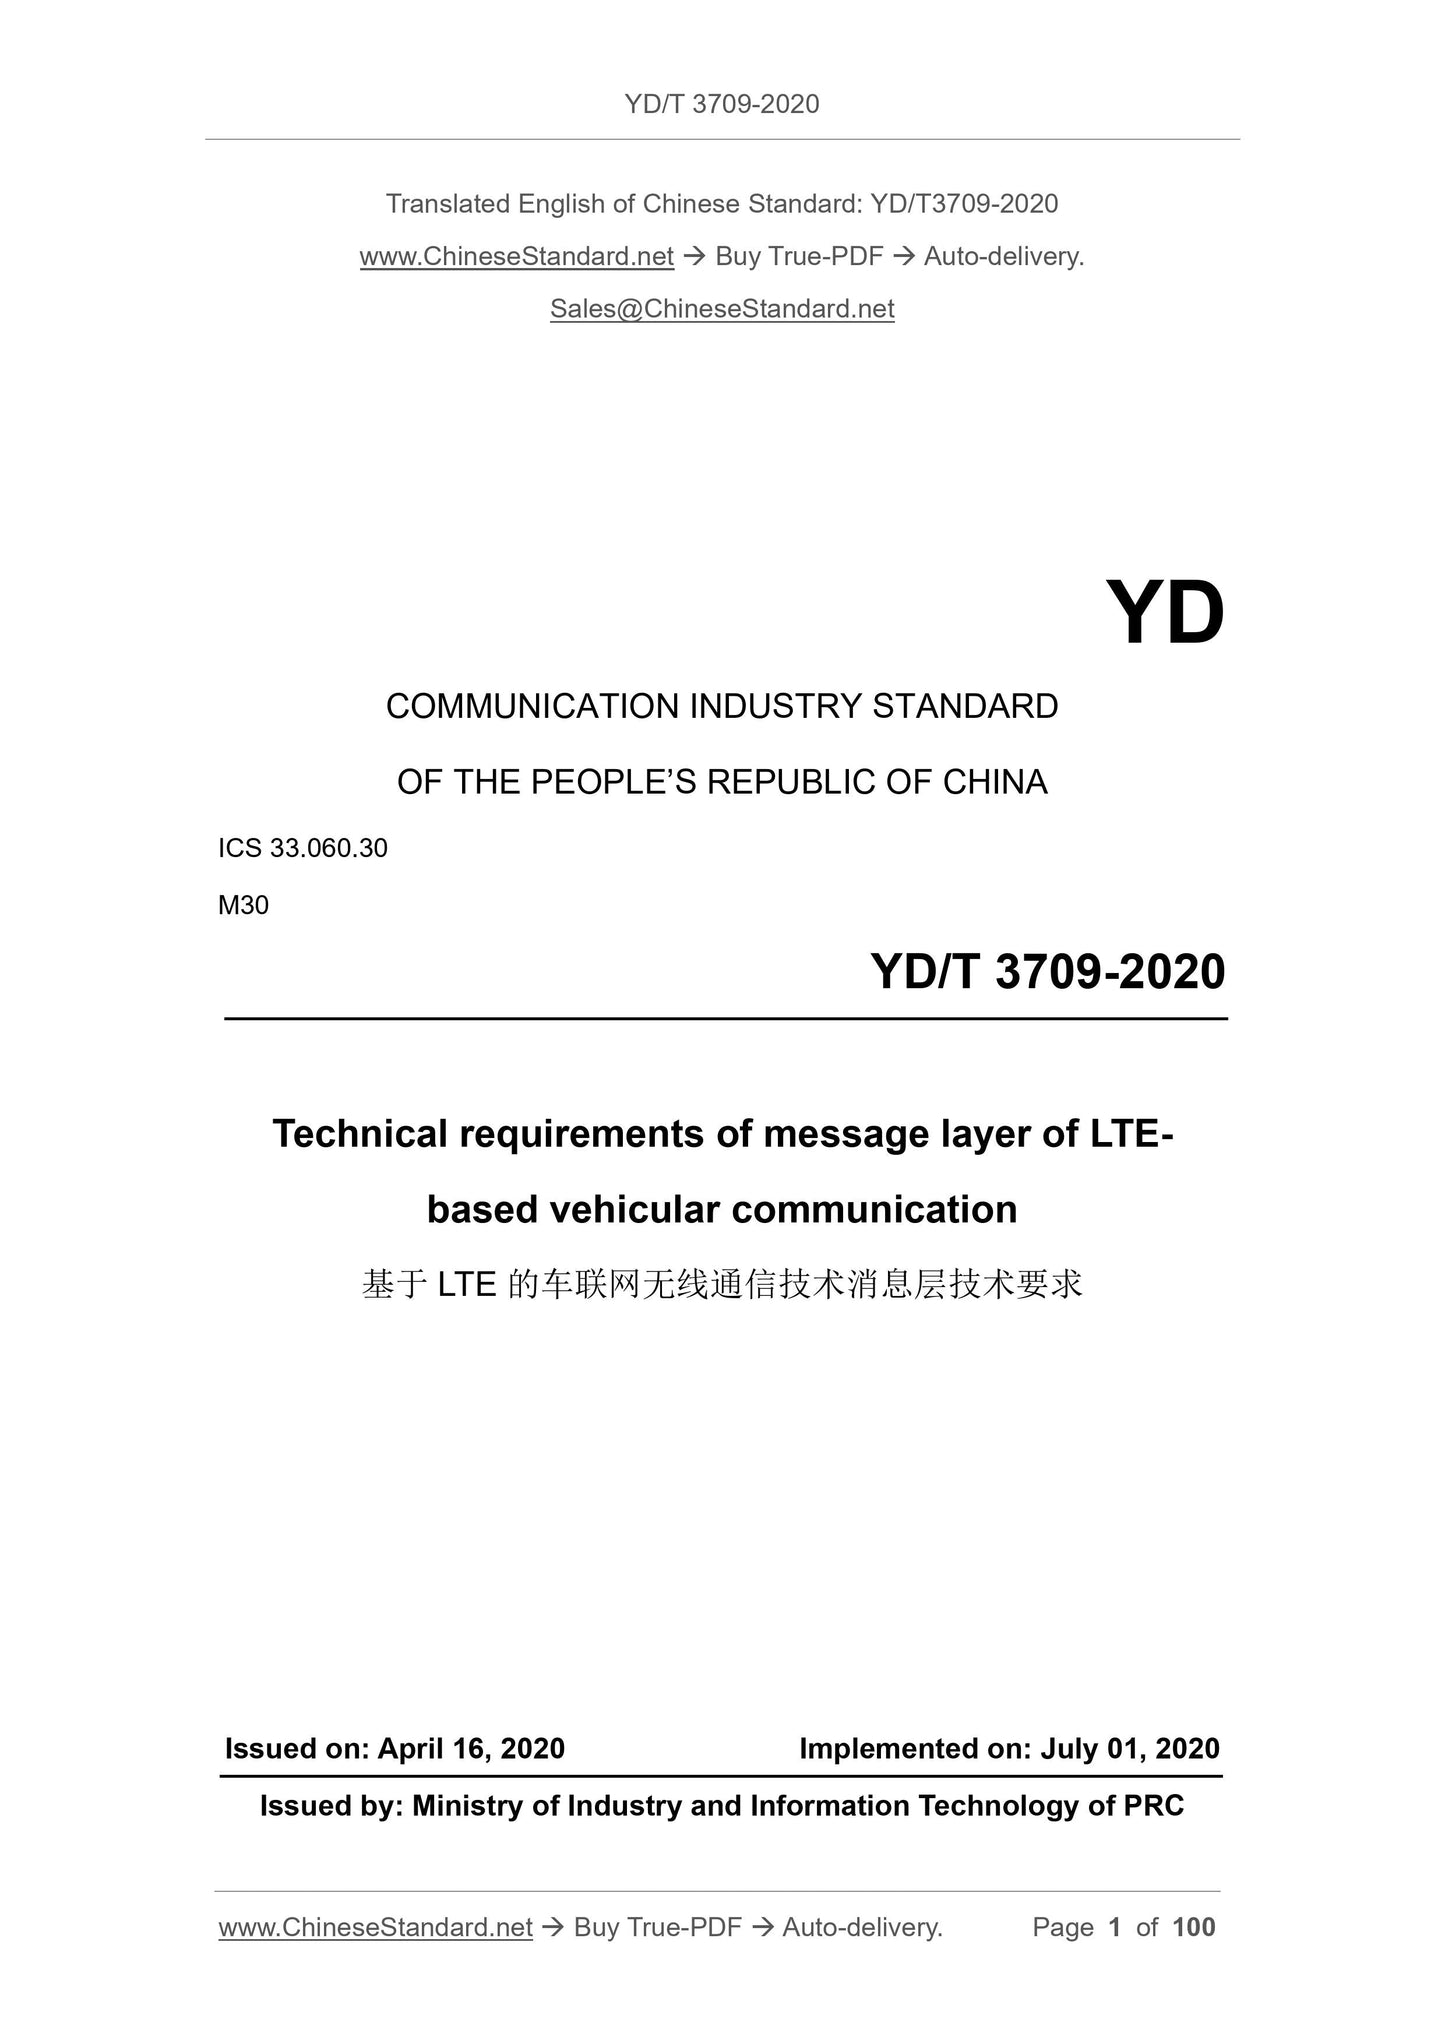 YD/T 3709-2020 Page 1